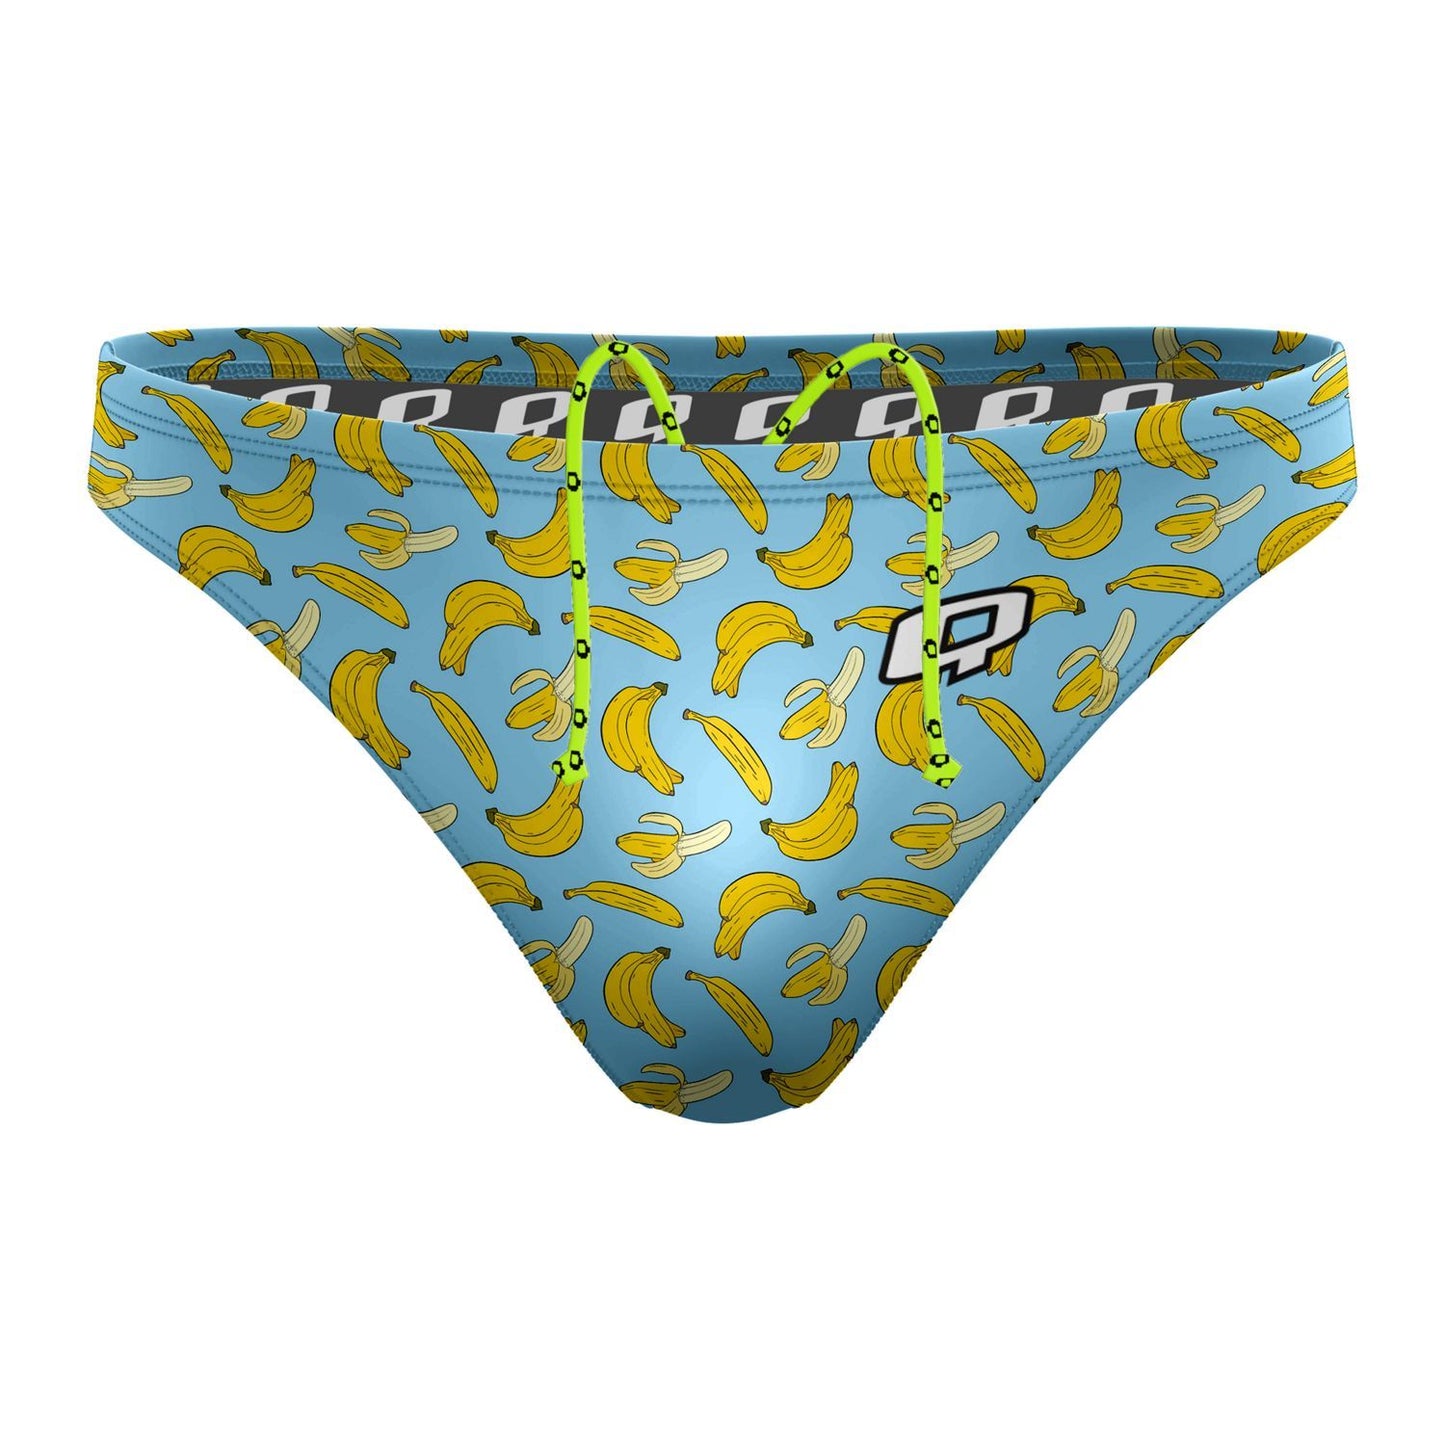 This Suit is Bananas Waterpolo Brief